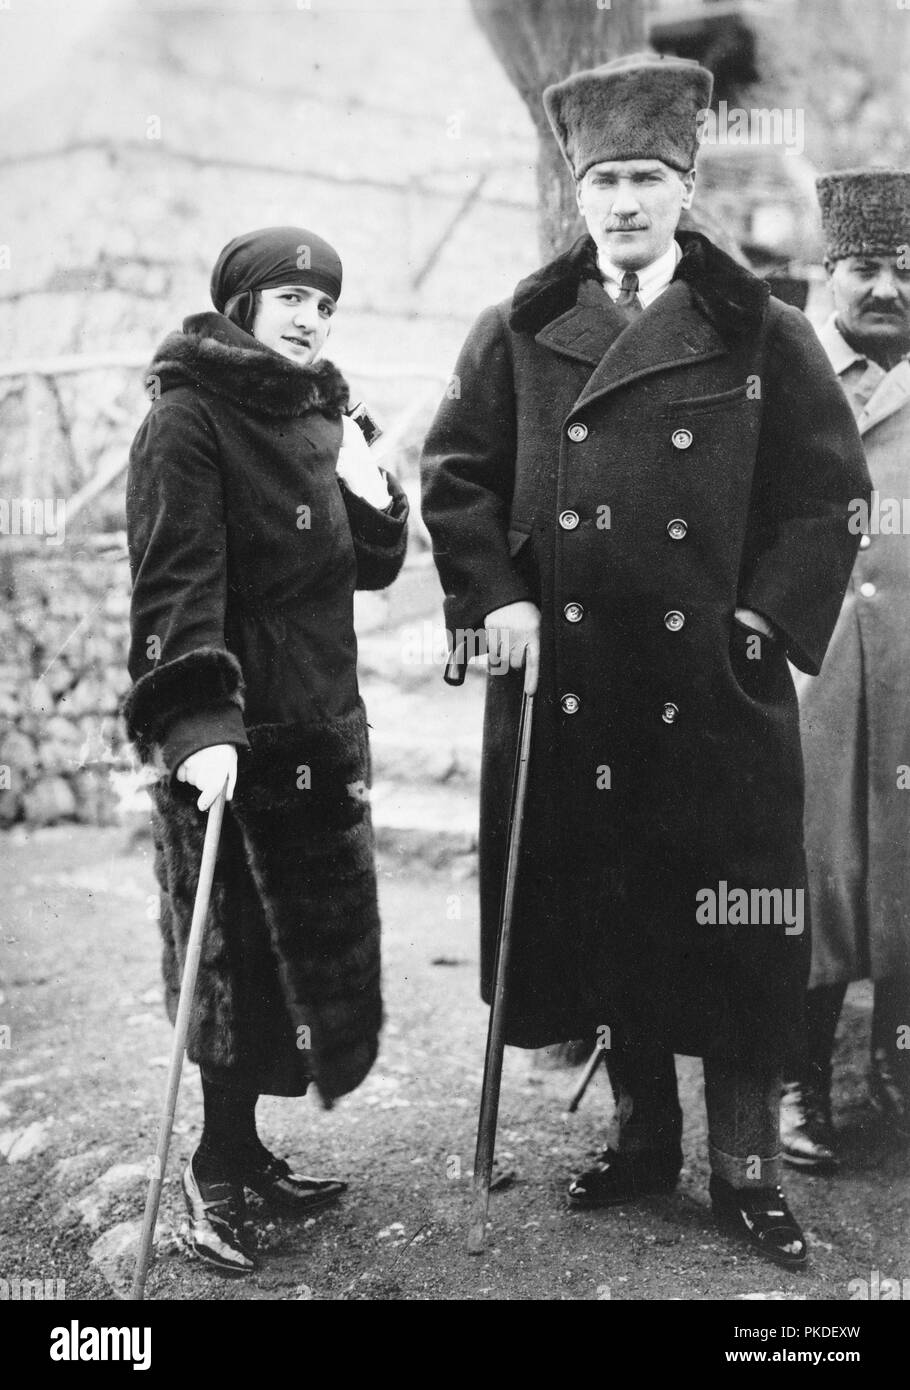 Mustafa Kemal Atatürk (1881 – 1938) Turkish revolutionary and founder of the Republic of Turkey, serving as its first President from 1923 until his death in 1938. Mustafa Kemal Atatürk and Latife Uşakizâde, Stock Photo